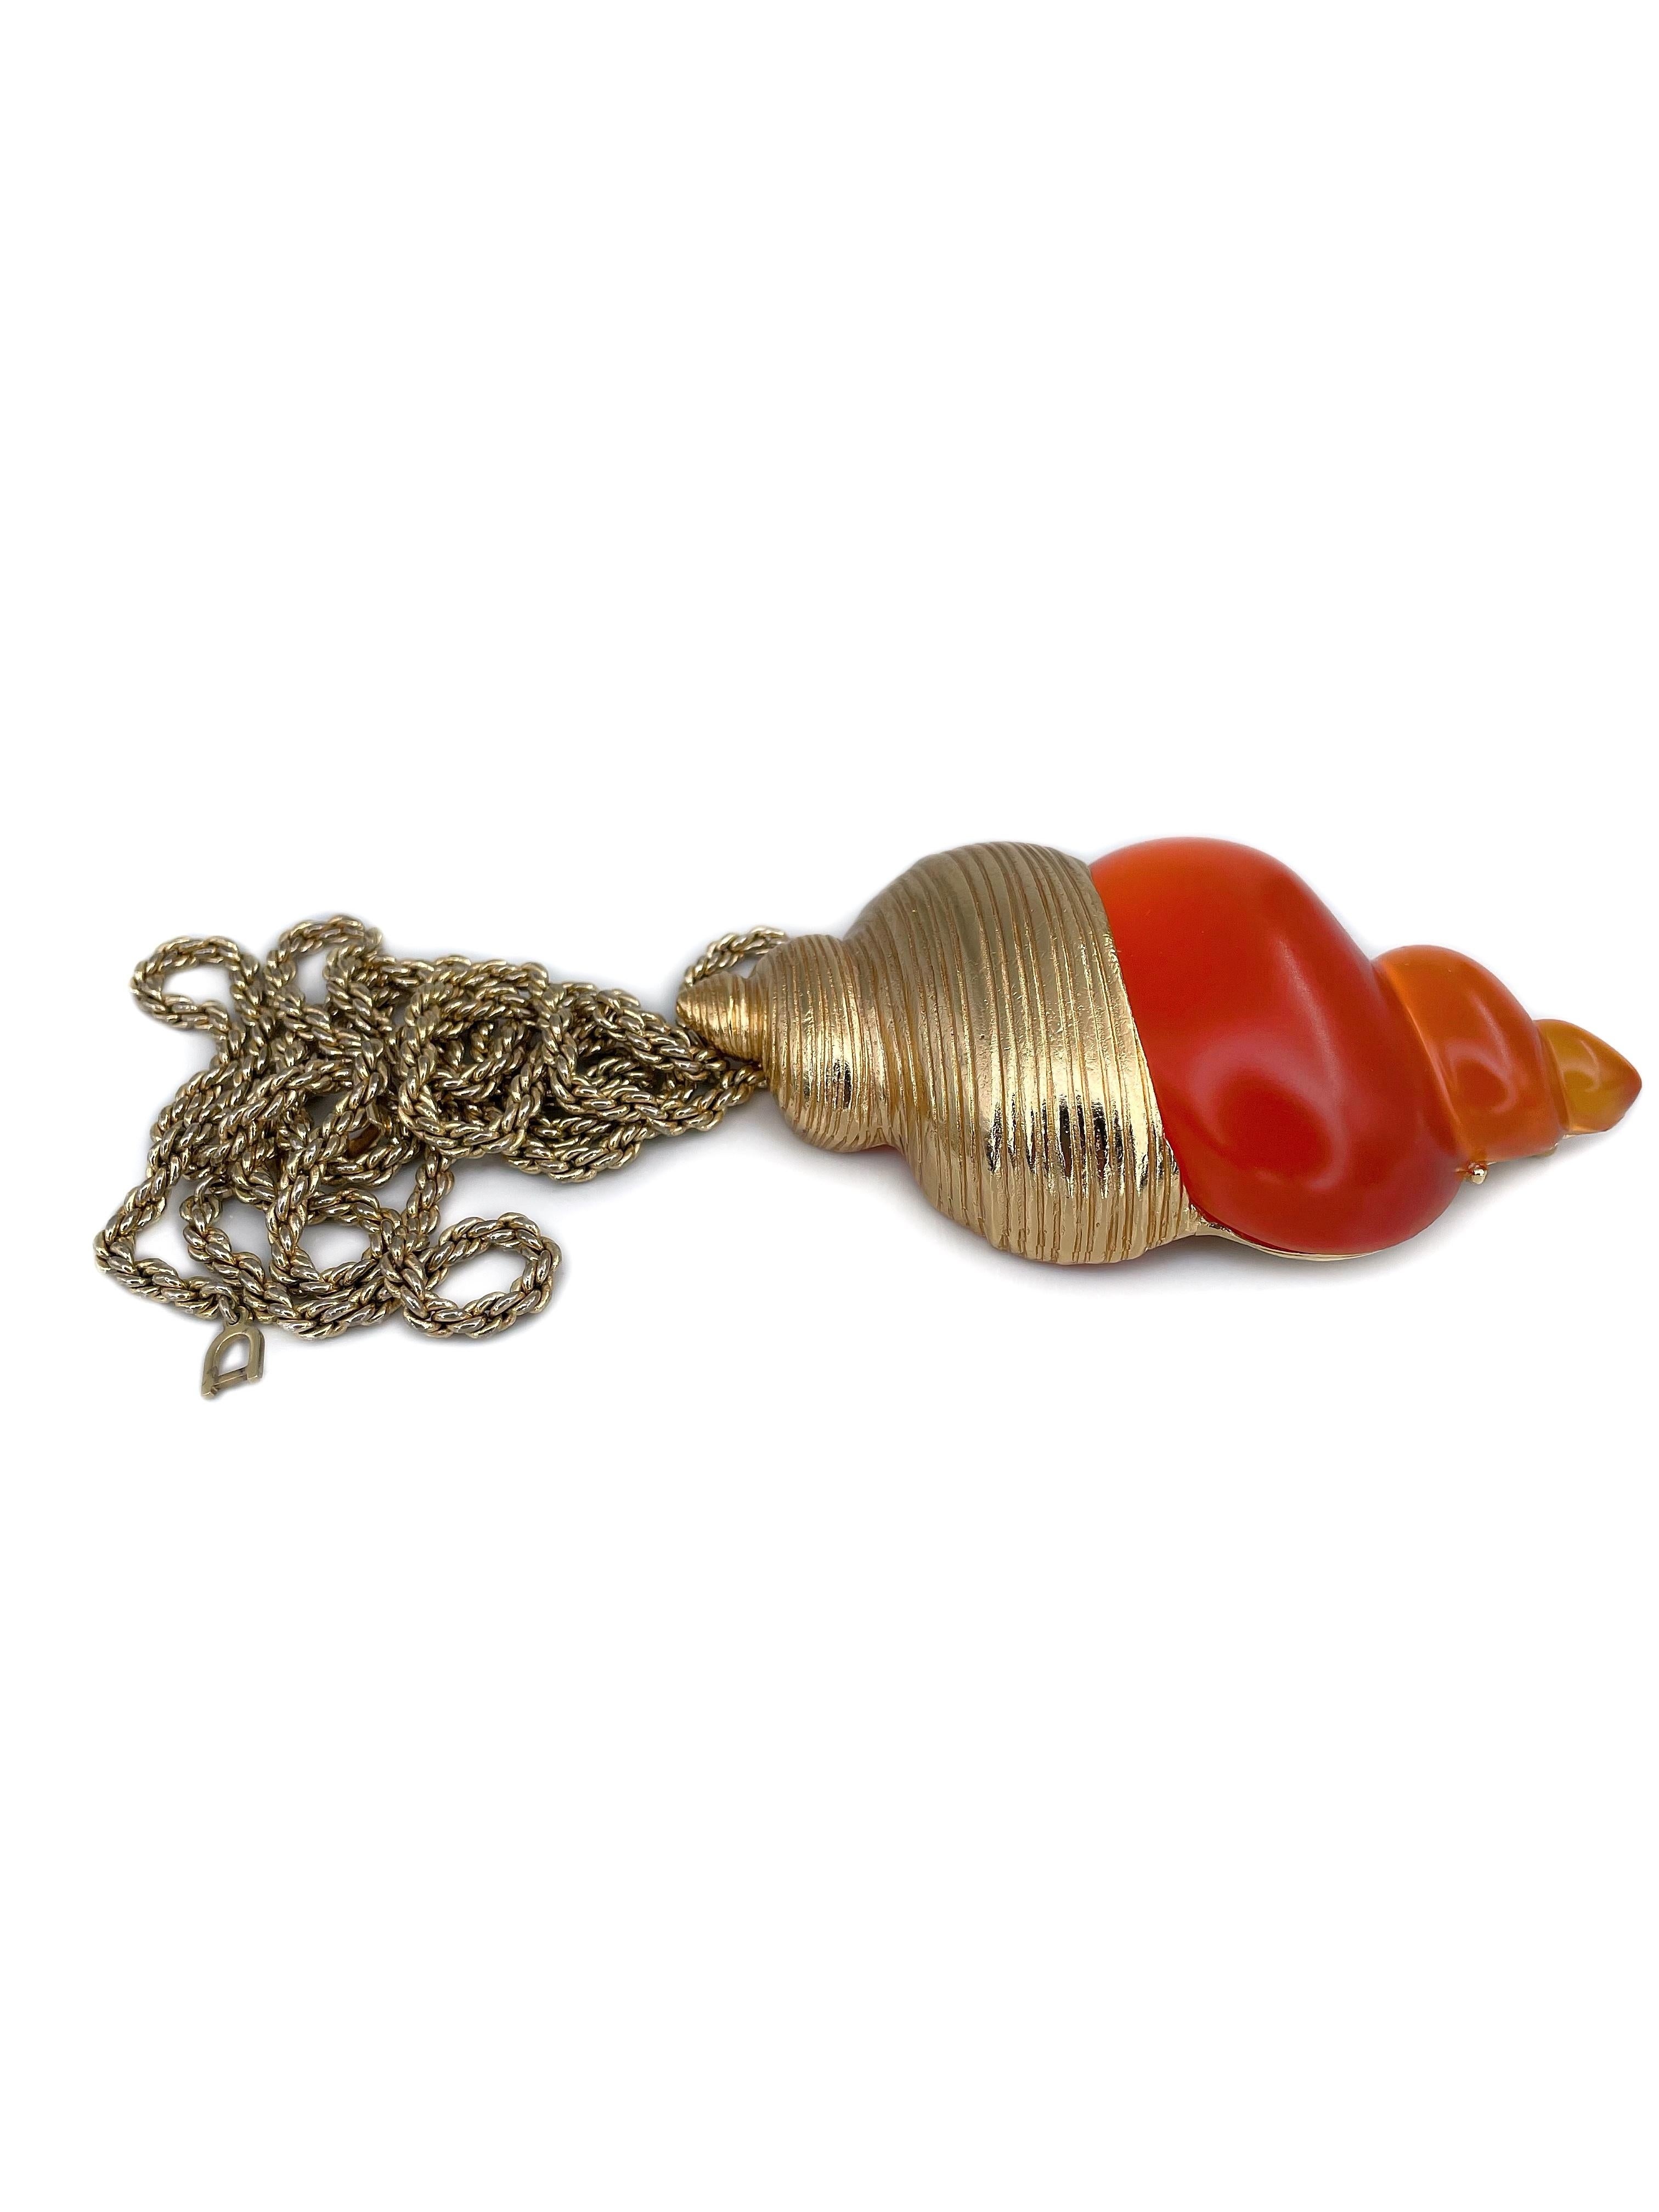 Modern 1980s Vintage Christian Dior Parfums Gold Tone Orange Shell Necklace Pin Brooch For Sale